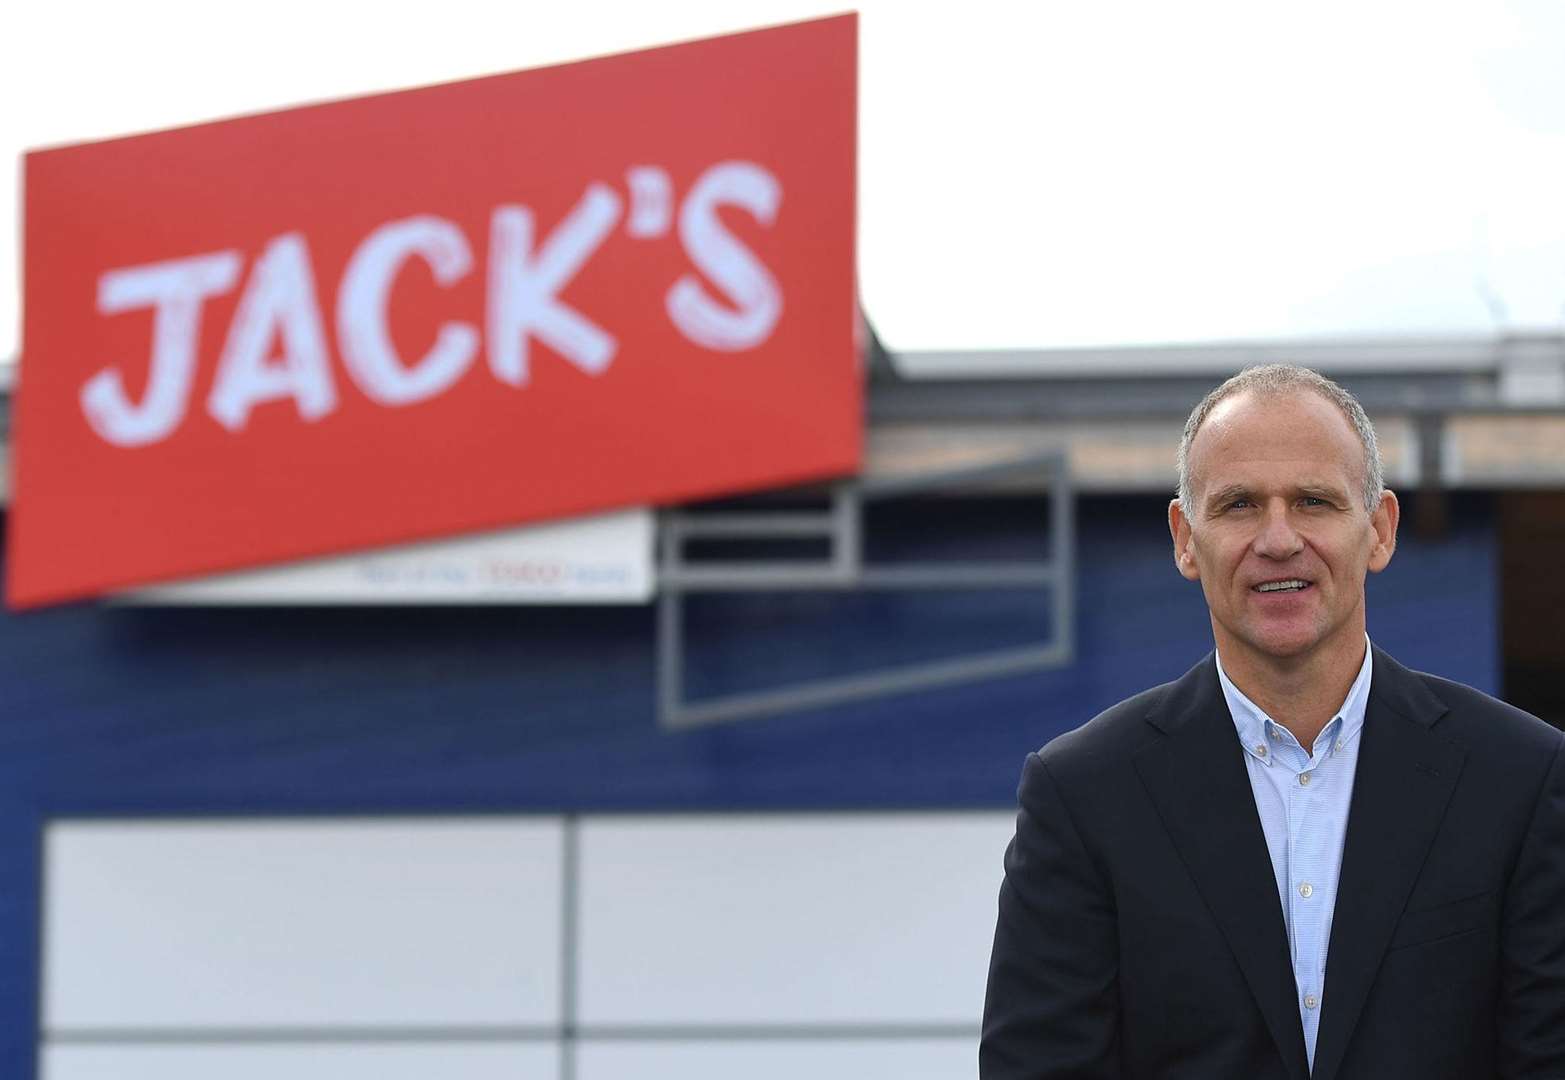 David Lewis is now cheif executive of Tesco, stands next to a new Jack's store at the launch of the brand in September last year. Picture: Joe Giddens/PA